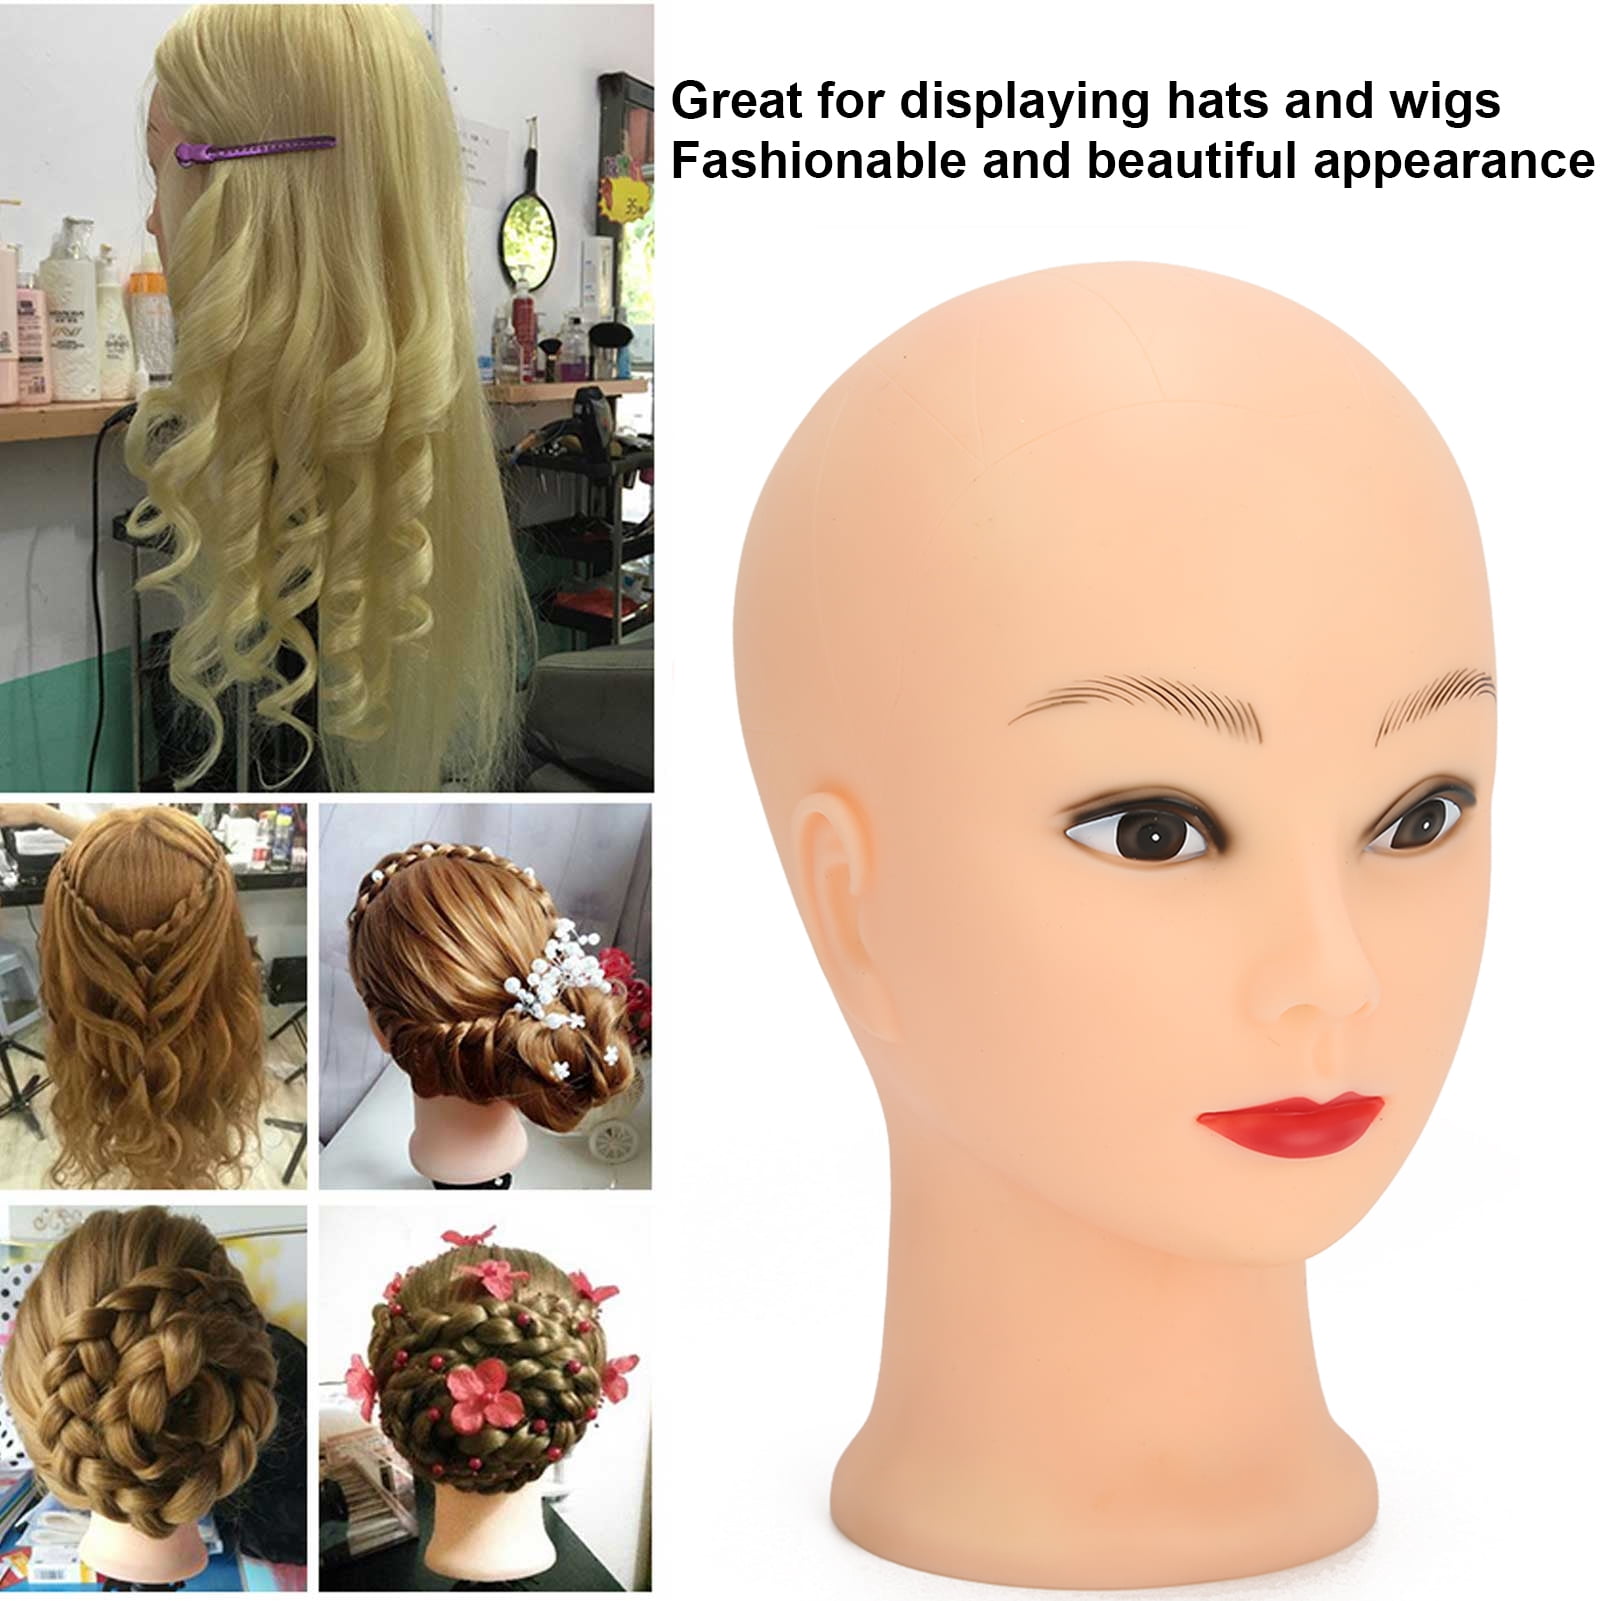 YTBYT Bald Mannequin Head Wig Making Head Professional Cosmetology